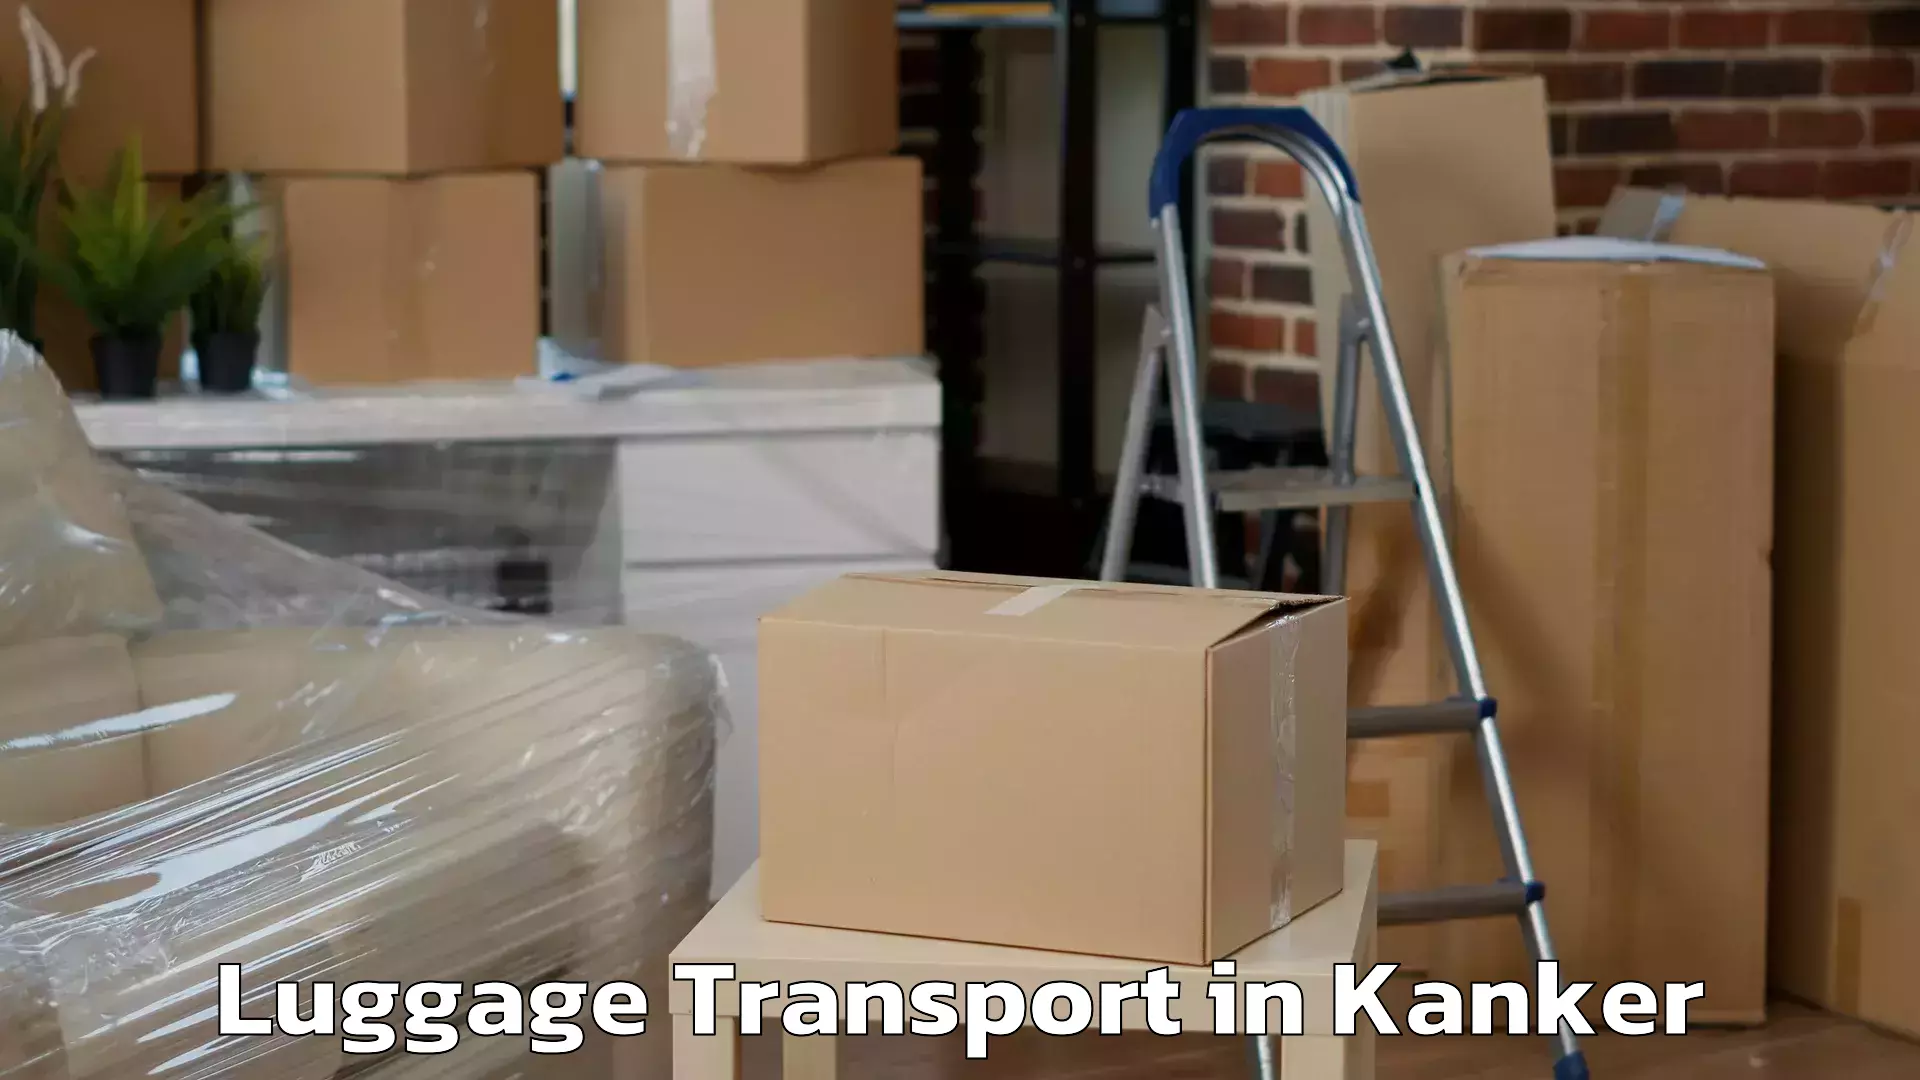 Quick luggage shipment in Kanker